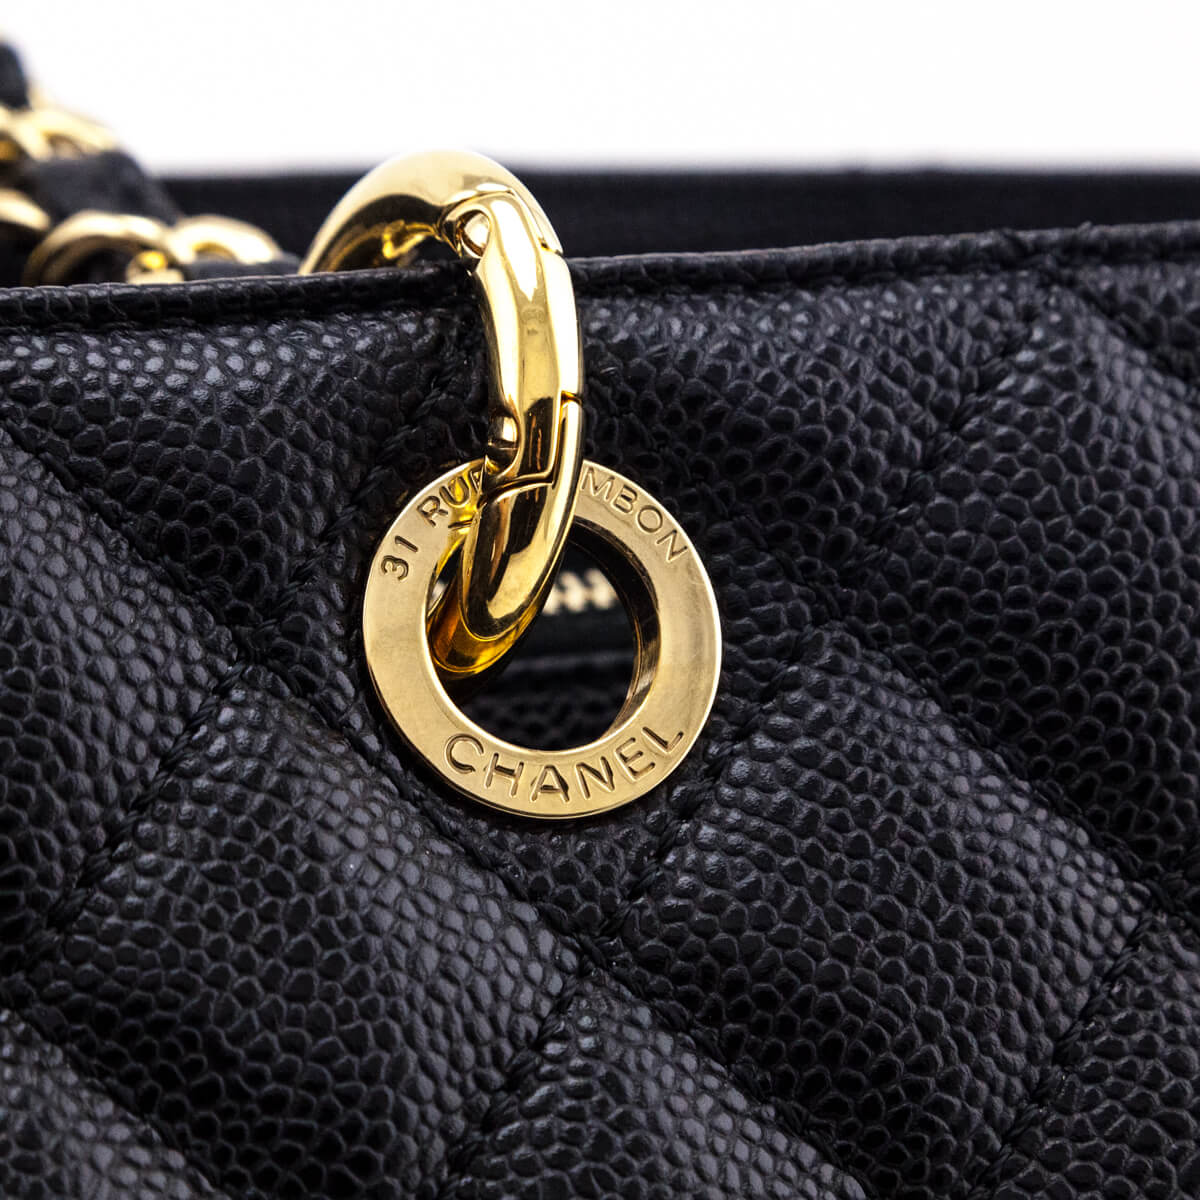 Chanel Black Quilted Caviar XL Grand Shopping Tote - Love that Bag etc - Preowned Authentic Designer Handbags & Preloved Fashions